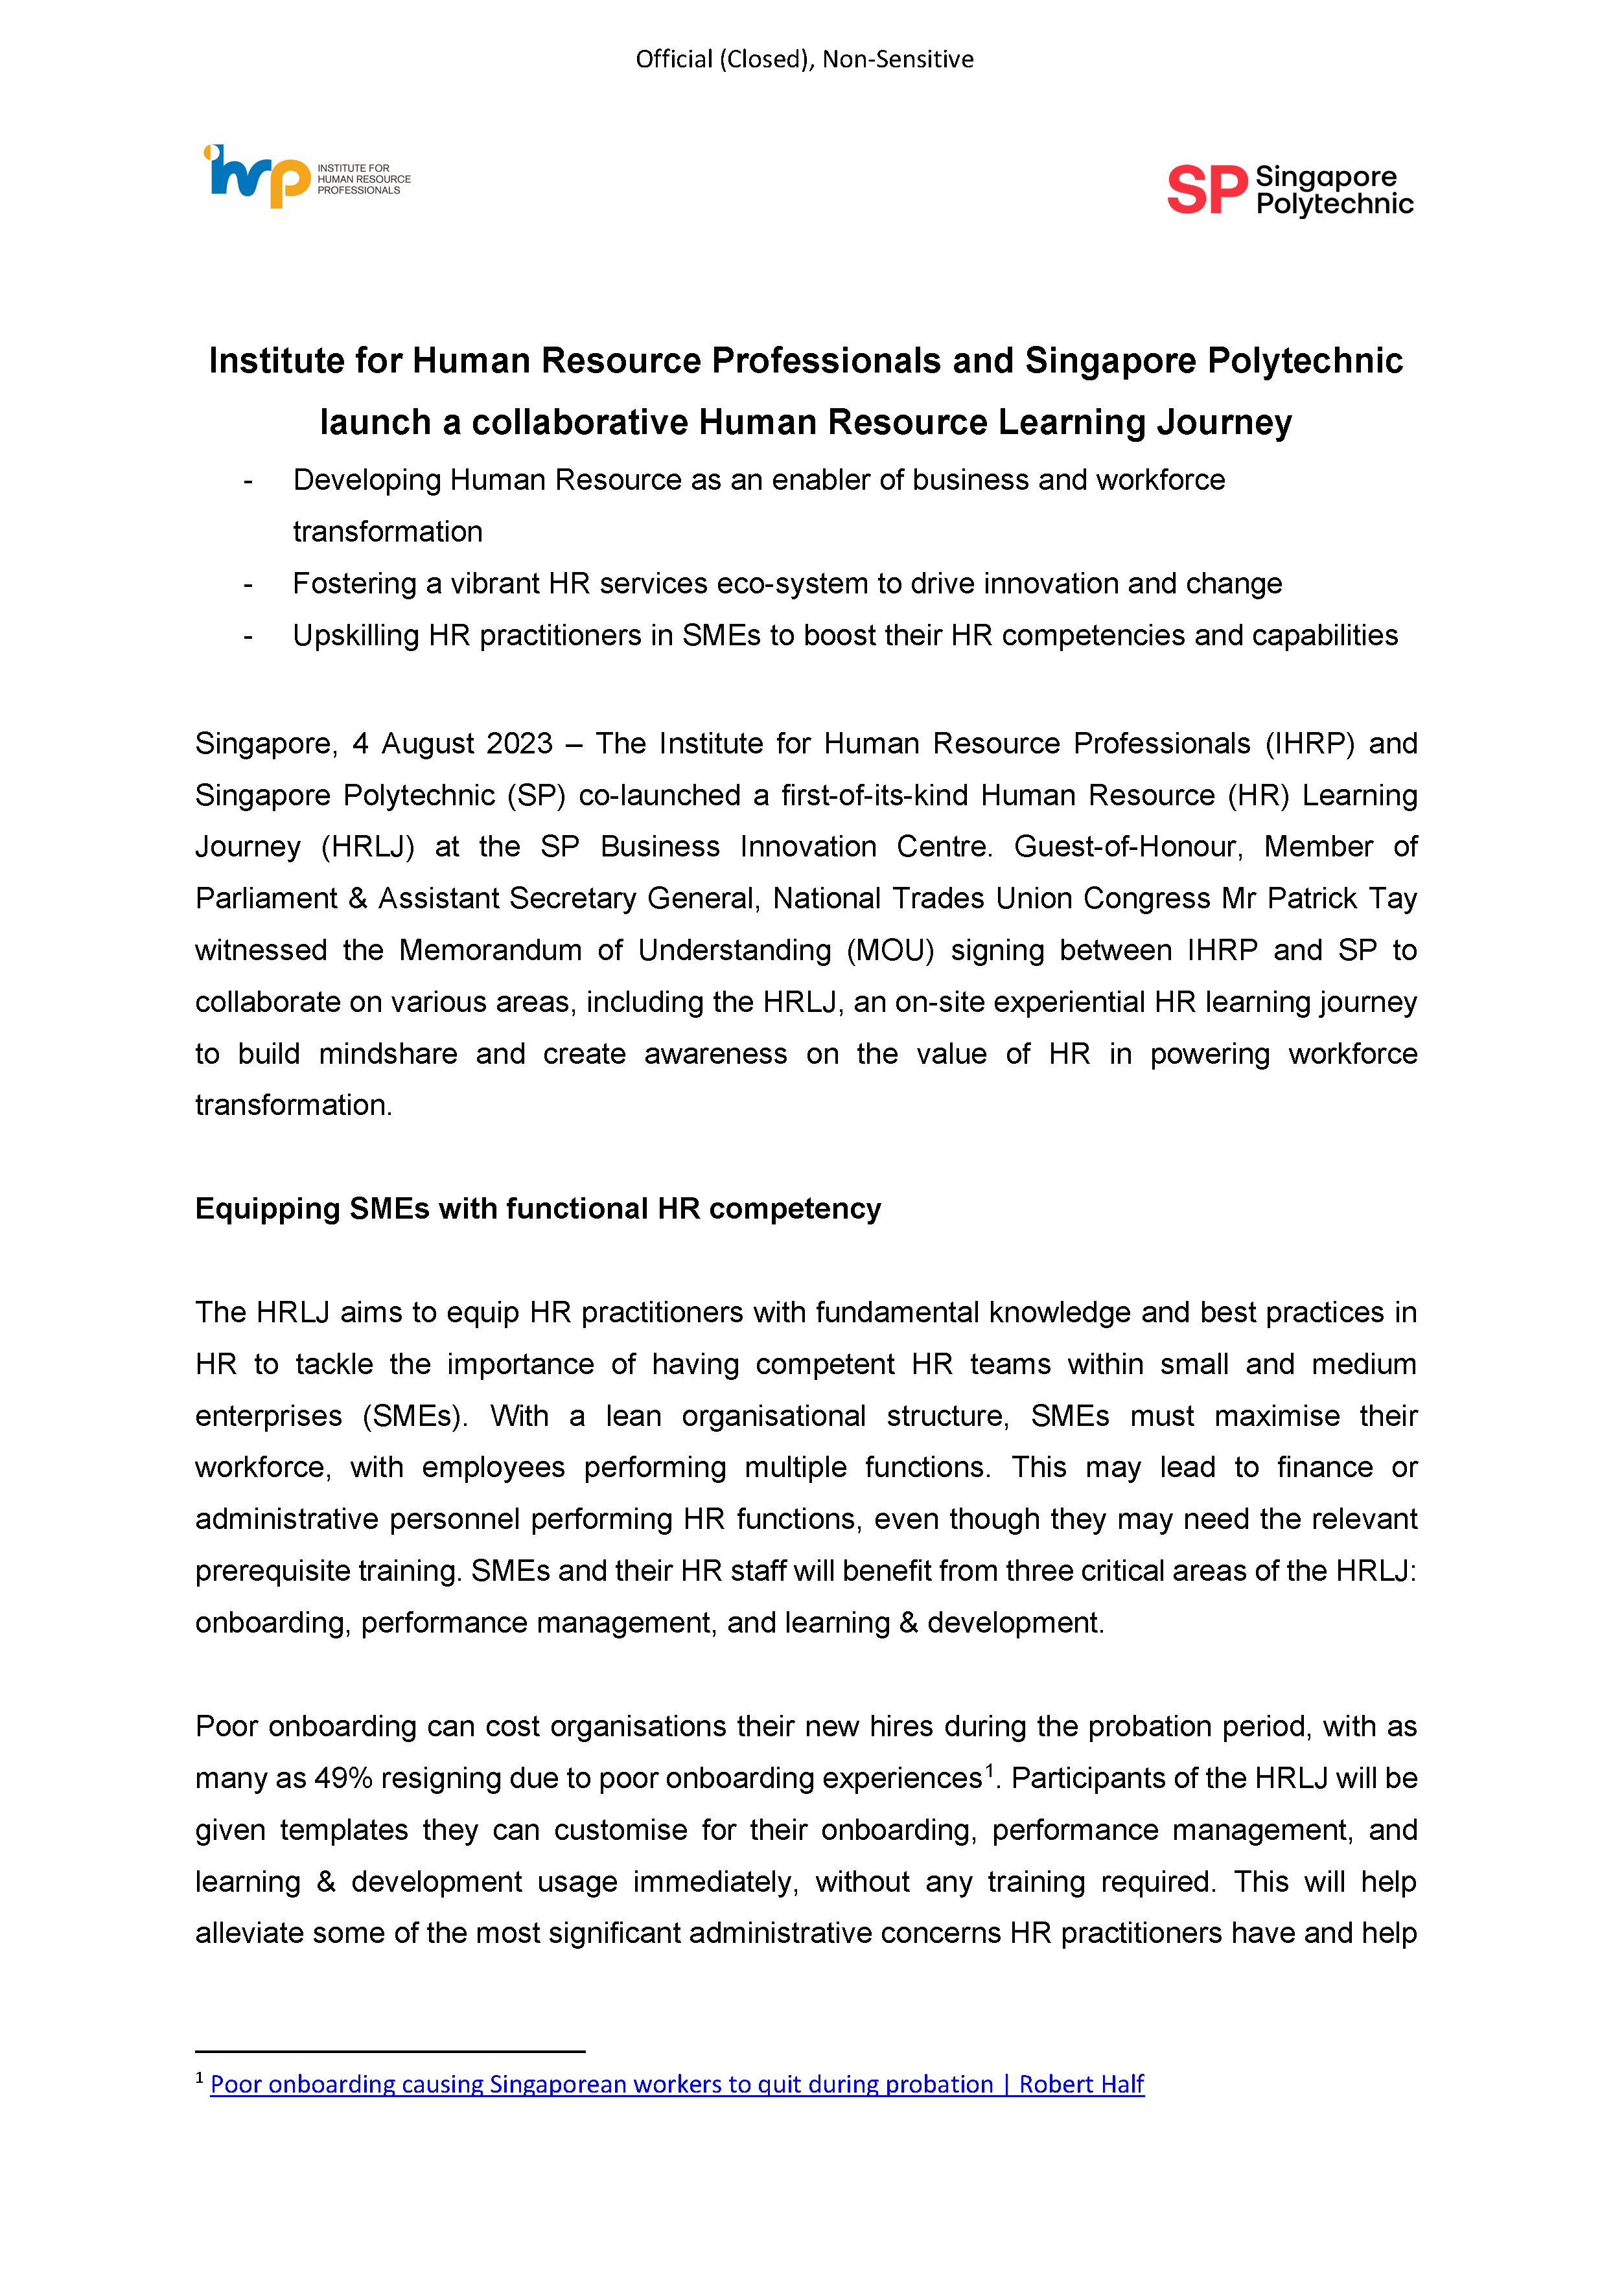 Press Release - Institute for Human Resource Professionals and Singapore Polytechnic launch a collaborative Human Resource Learning Journey_Page_1